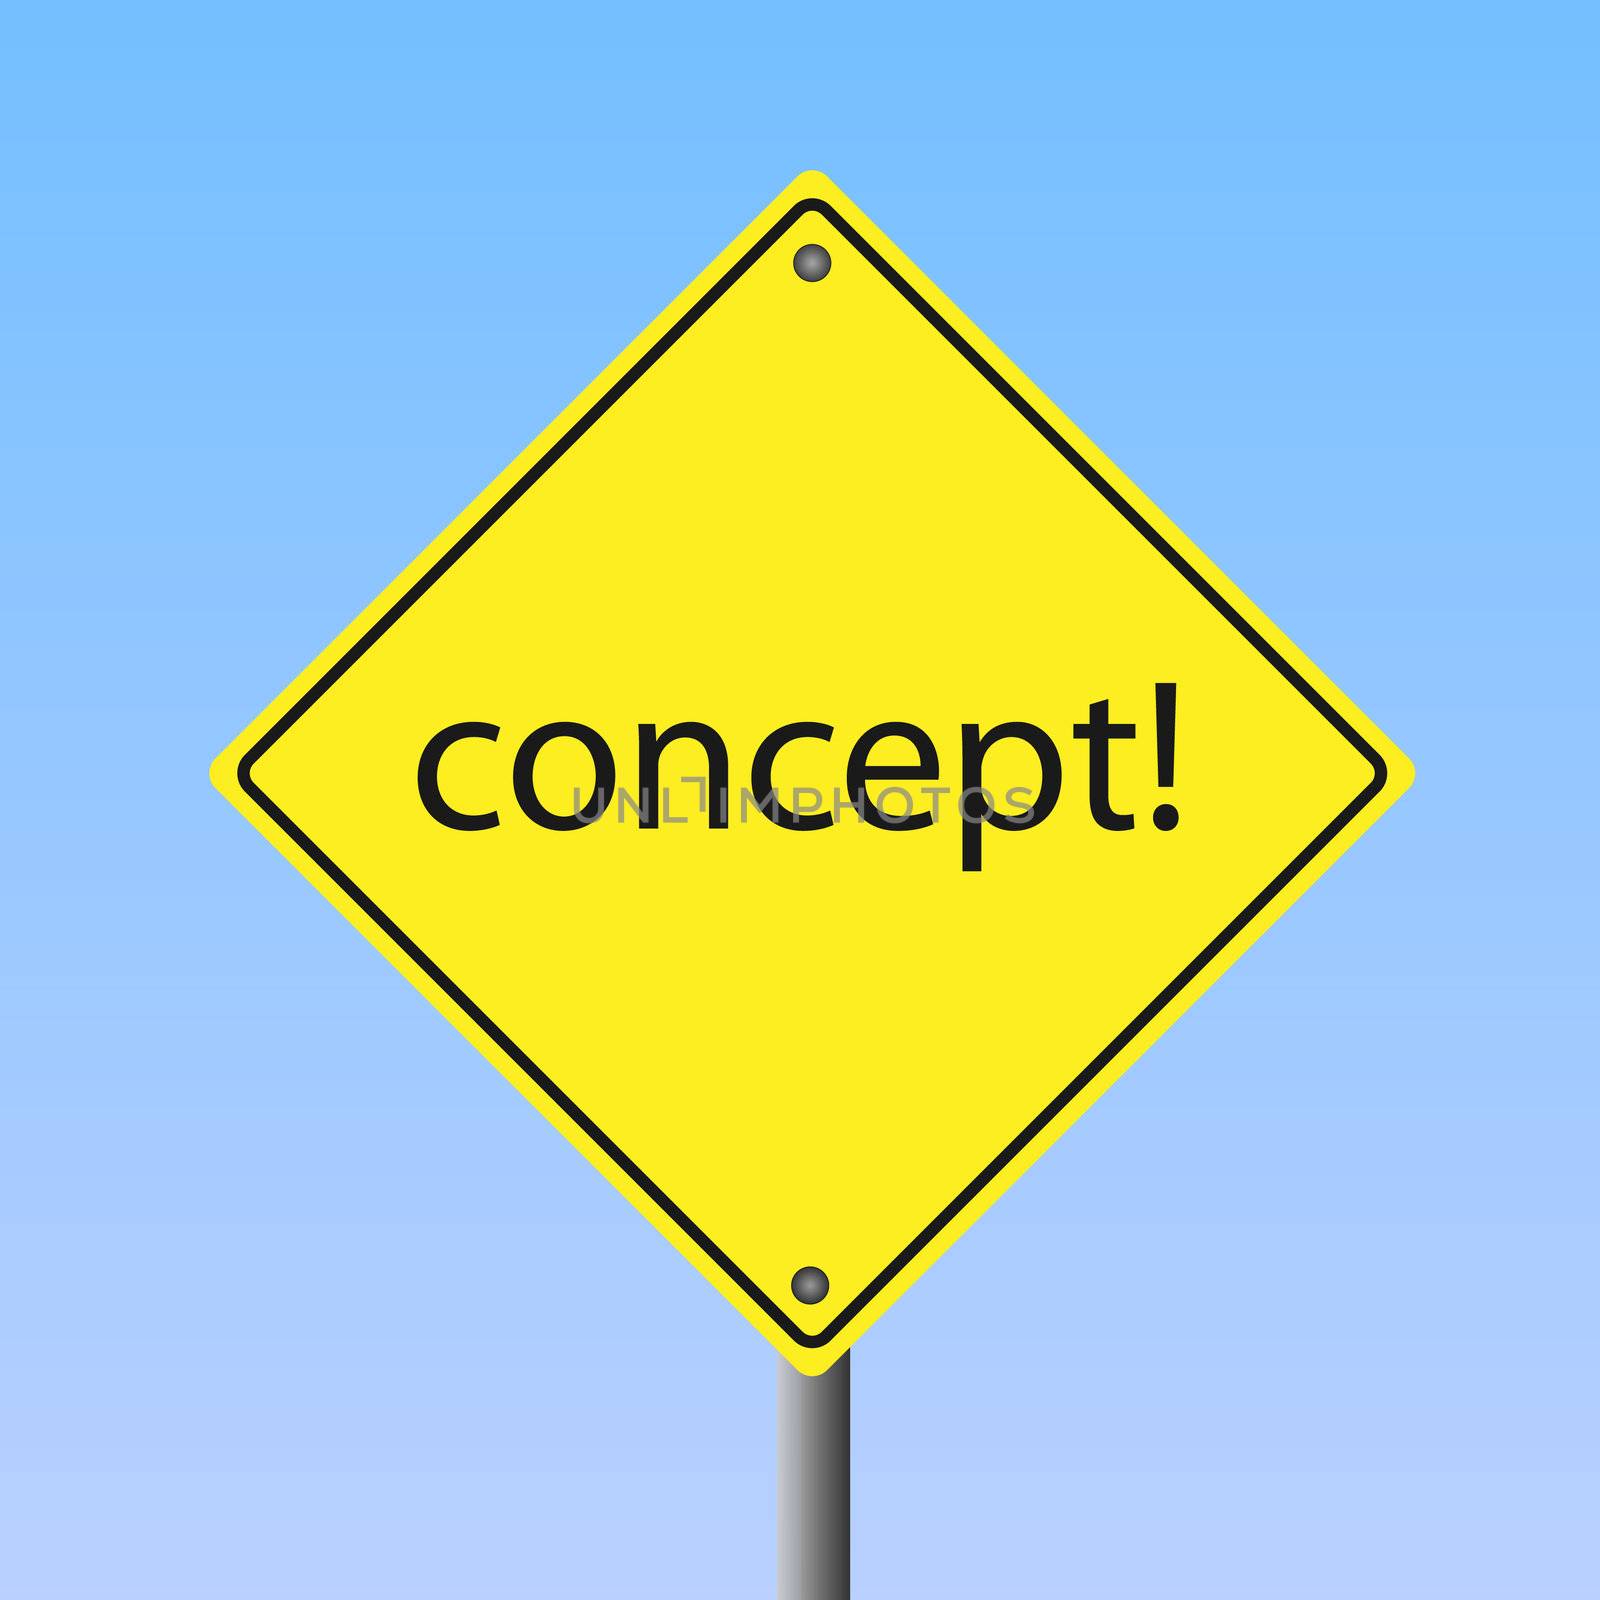 Image of a "concept" sign against a blue sky background.